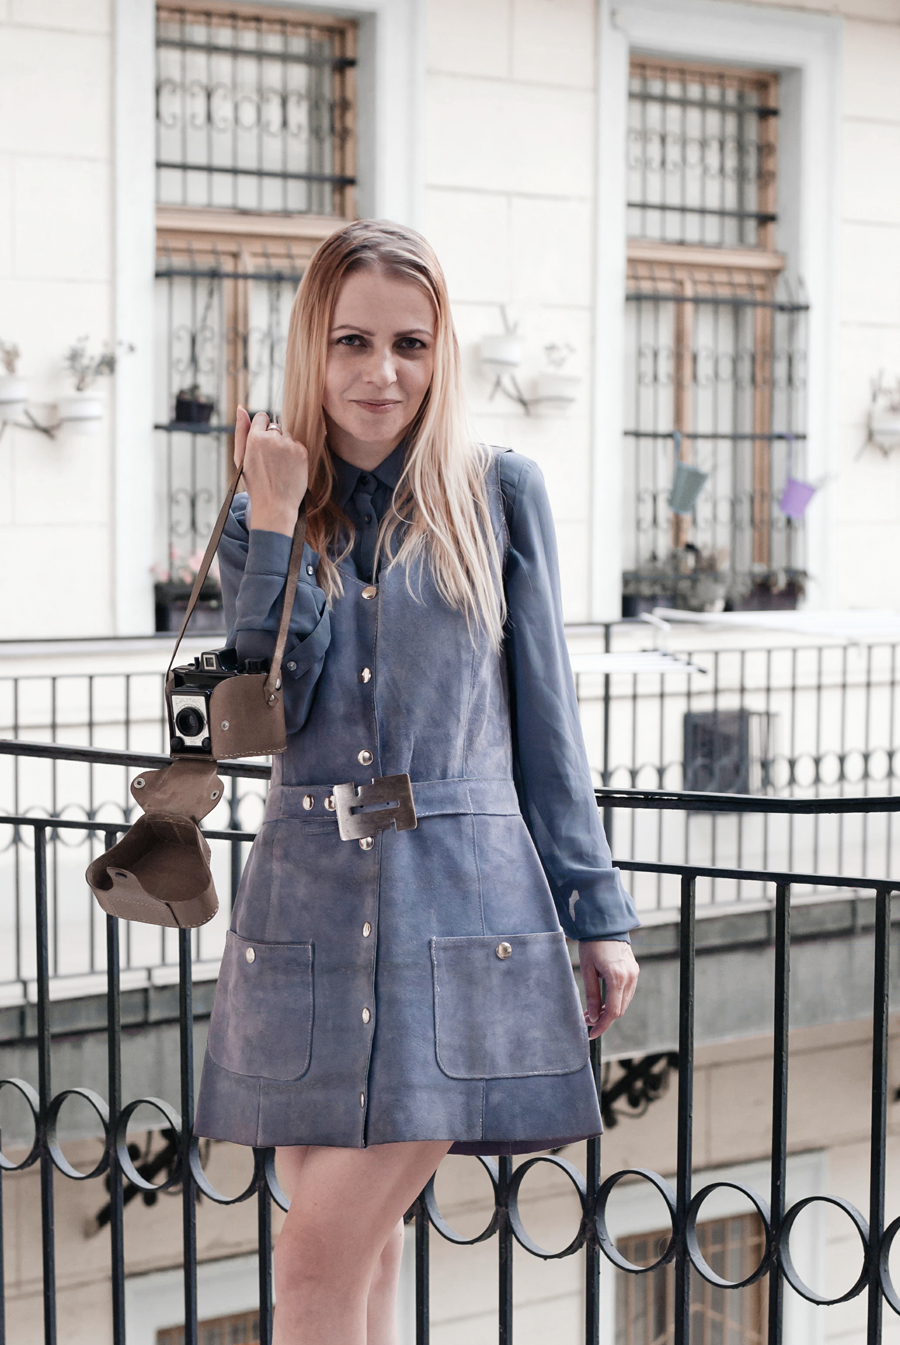 sixties seventies retro vintage suede dress EPIC STREET STYLE by Gabriella